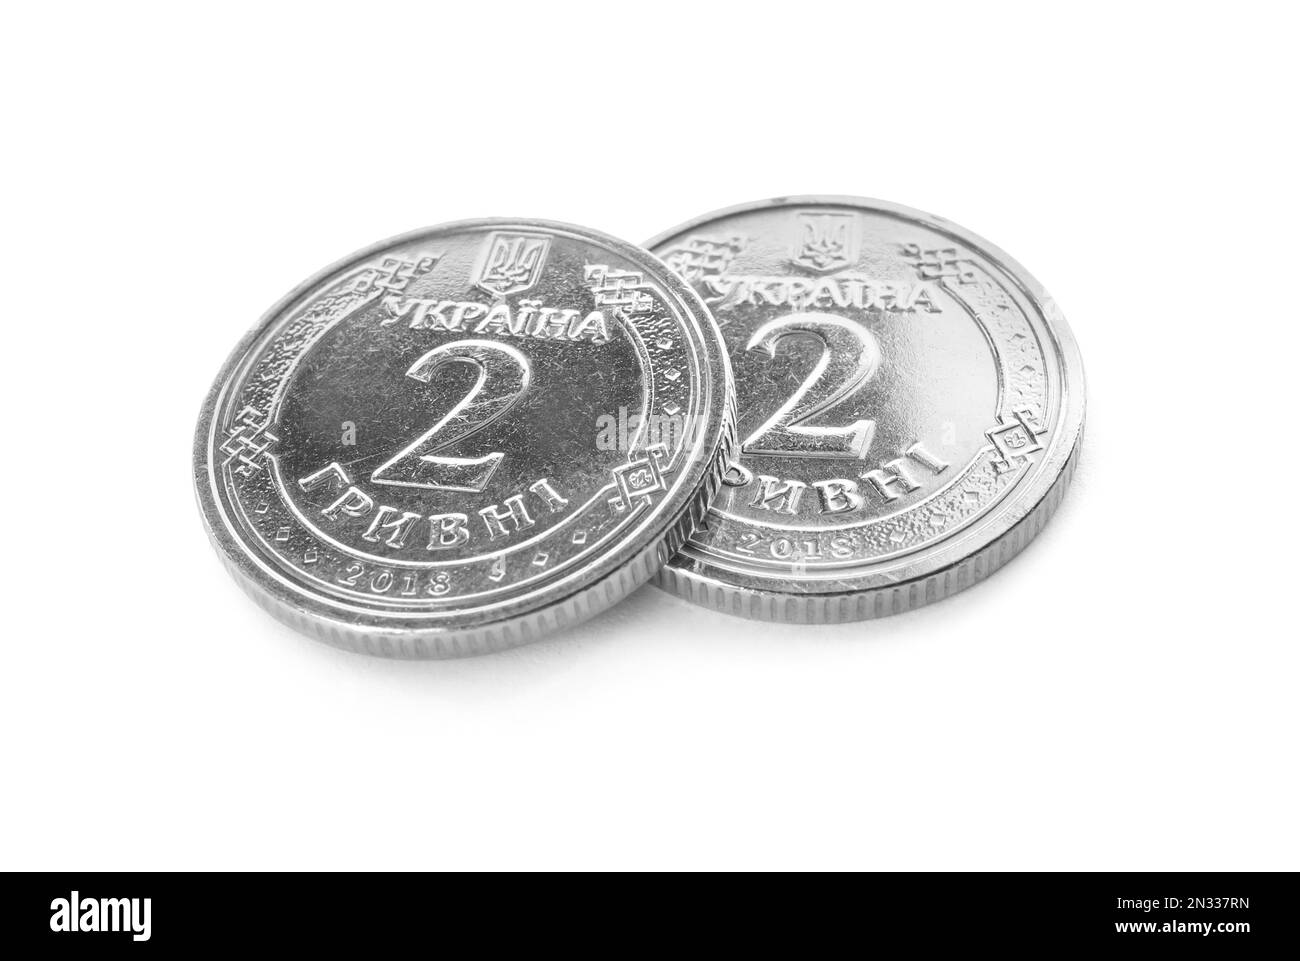 Ukrainian coins on white background. National currency Stock Photo